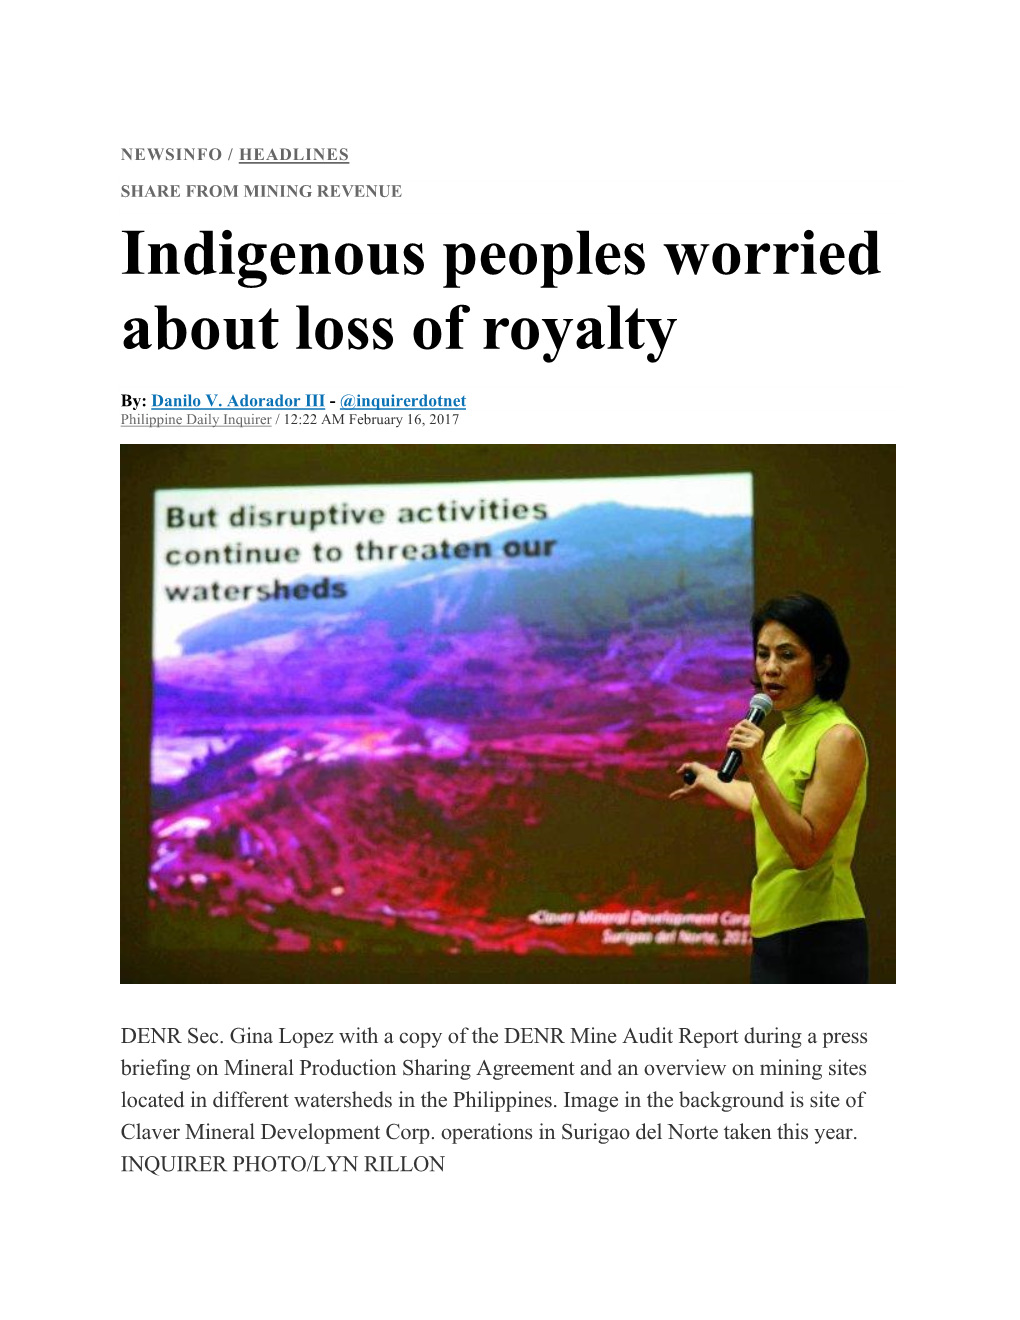 Indigenous Peoples Worried About Loss of Royalty